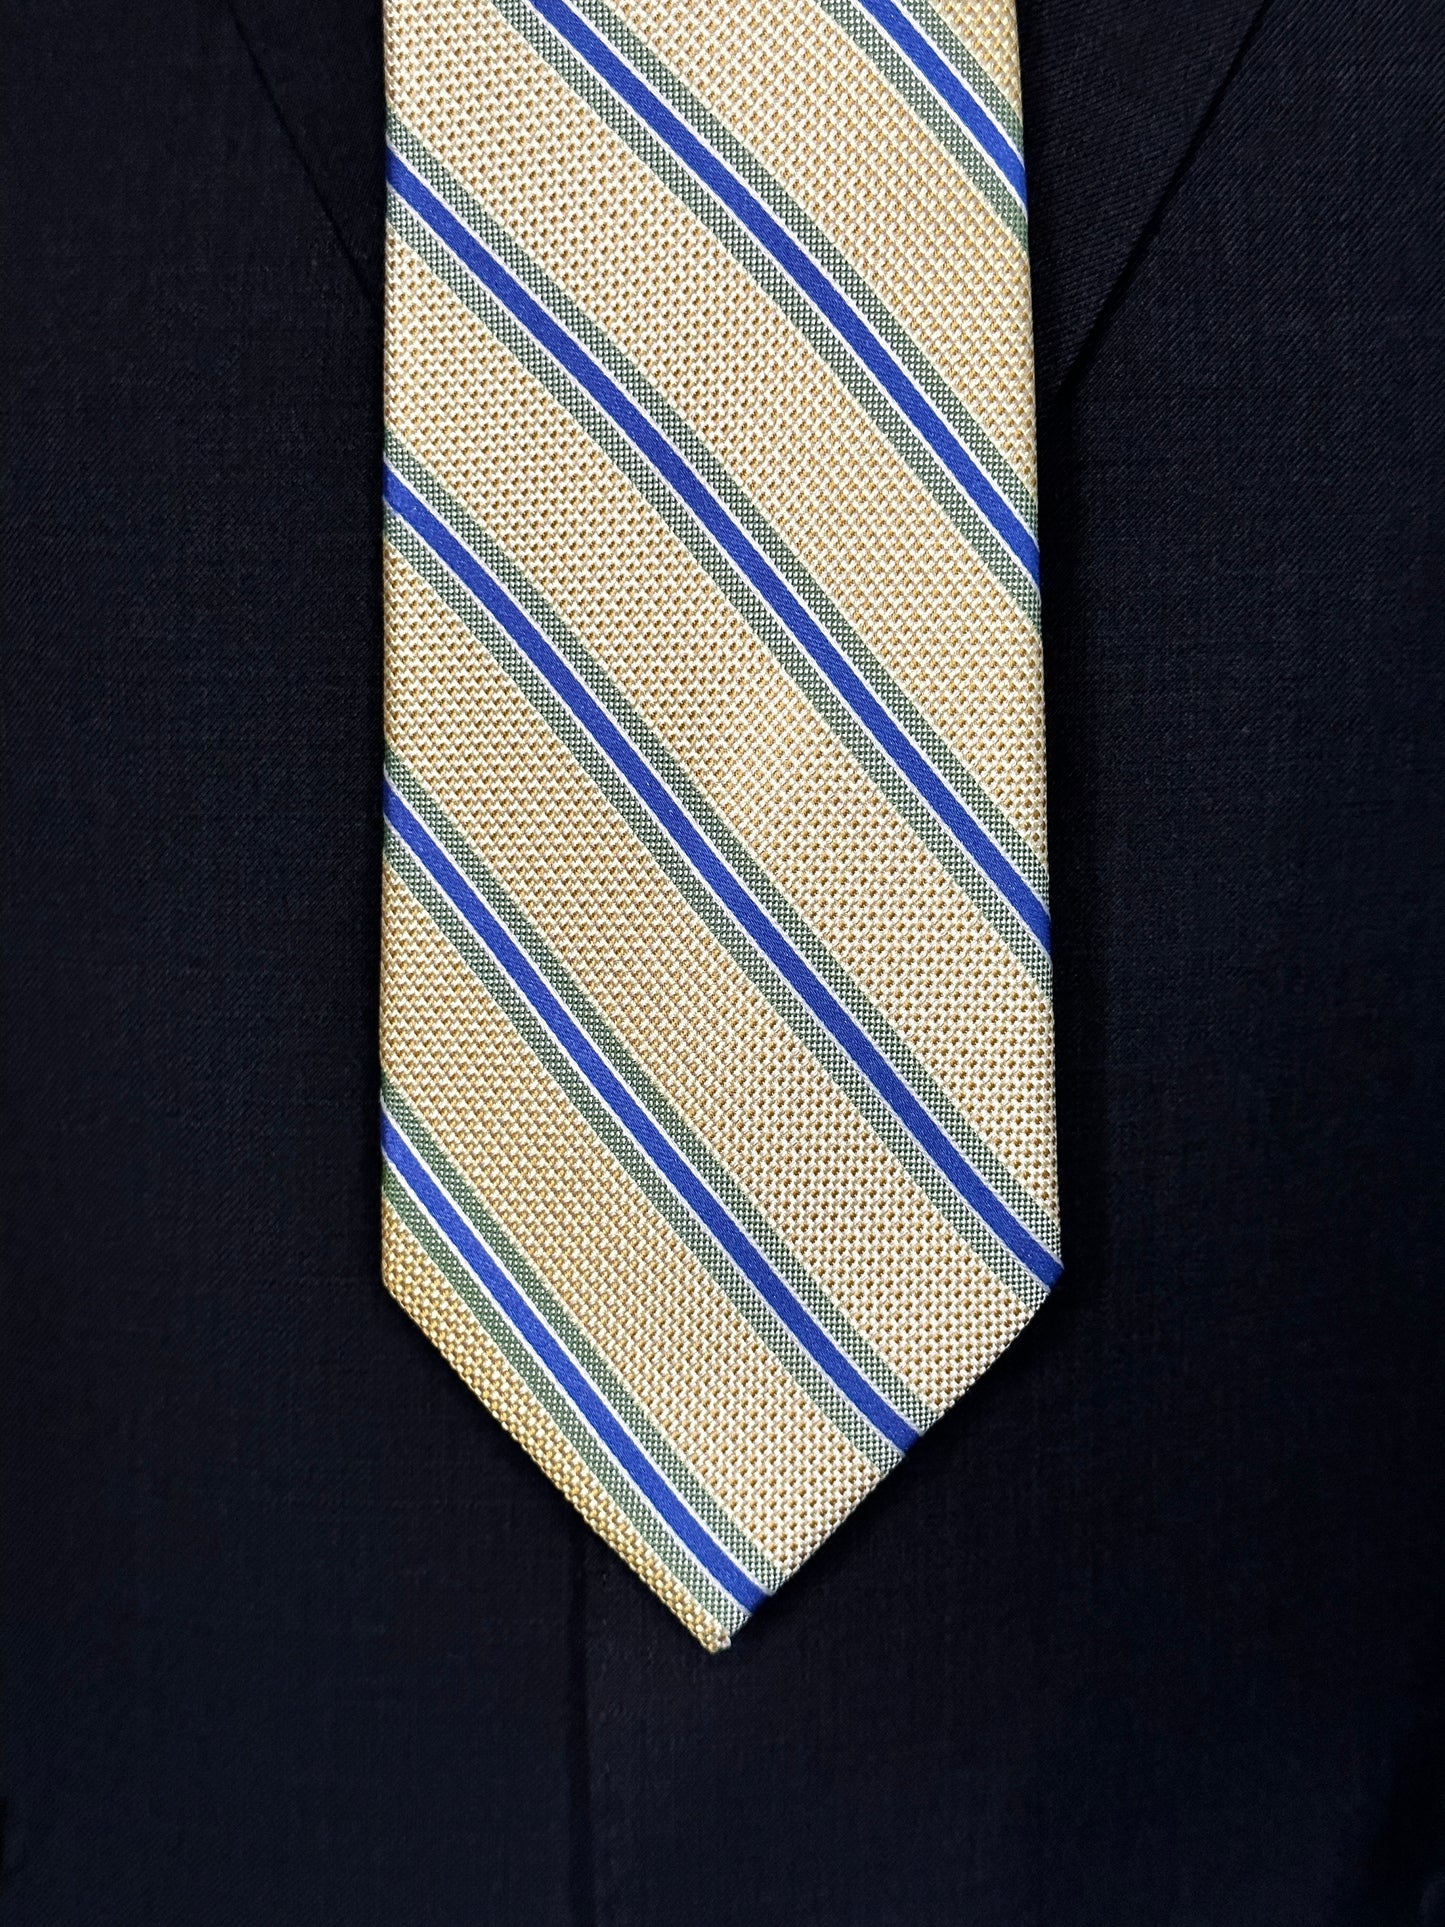 A general all around great tie to wear with any suit, shirt for any occasion. With two different types of silk in the same necktie, the stripe being satin and the broad section being woven, this tie makes an all day knot that does not have to be readjusted. With colorations of kelly green and blue stripes, you cannot make a mistake creating a look with this tie pairing with any suit in your closet.